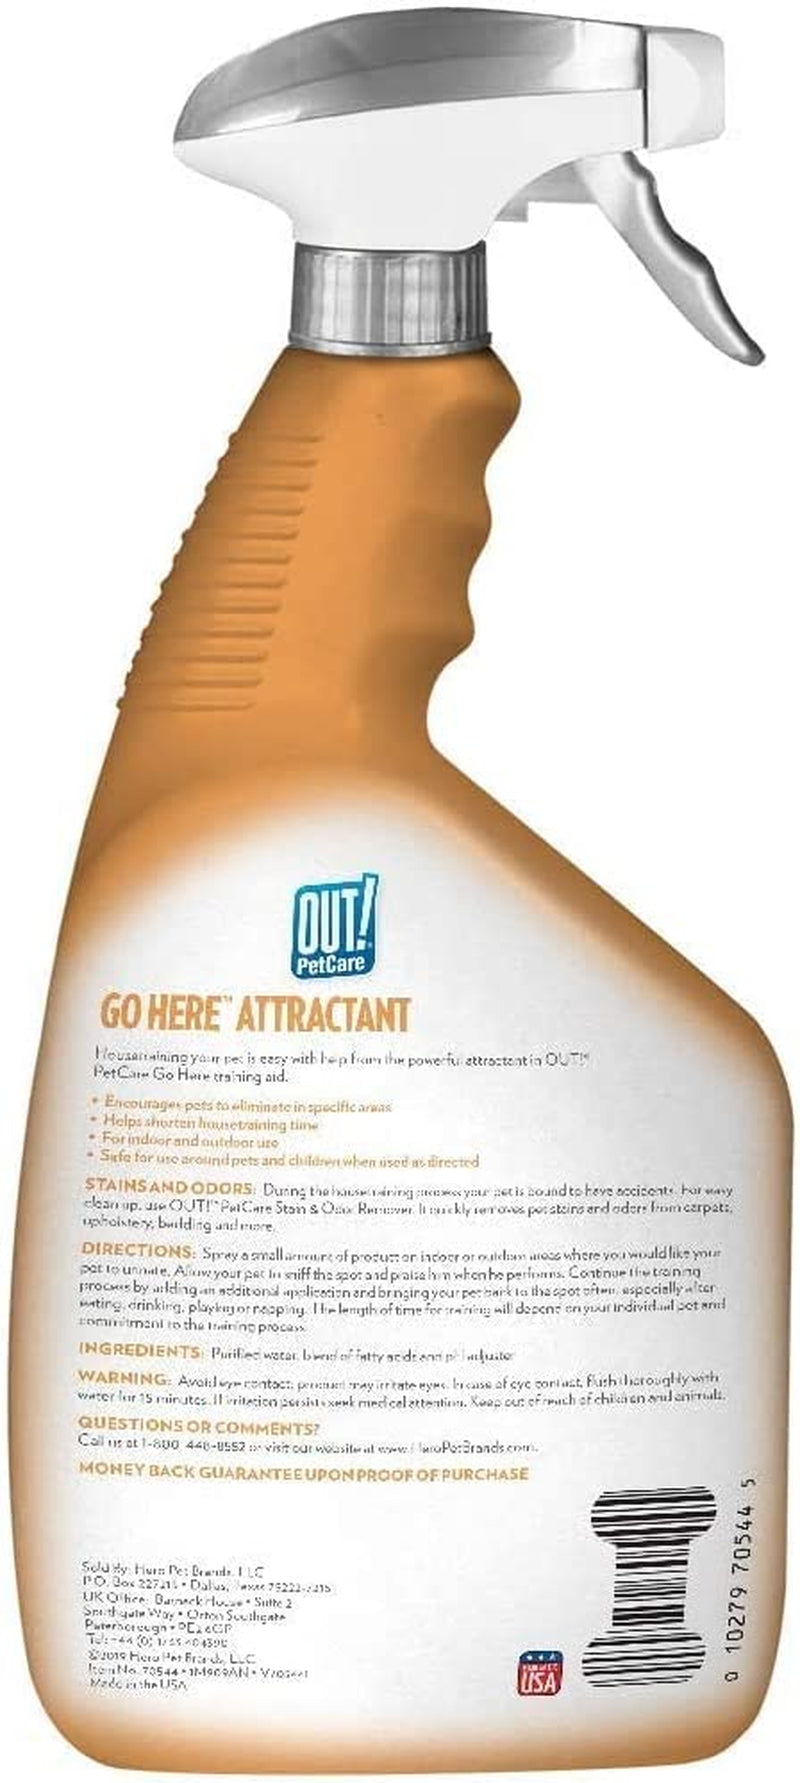 Petcare Go Here Attractant Indoor and Outdoor Dog Training Spray - House-Training Aid for Puppies and Dogs - 32 Oz